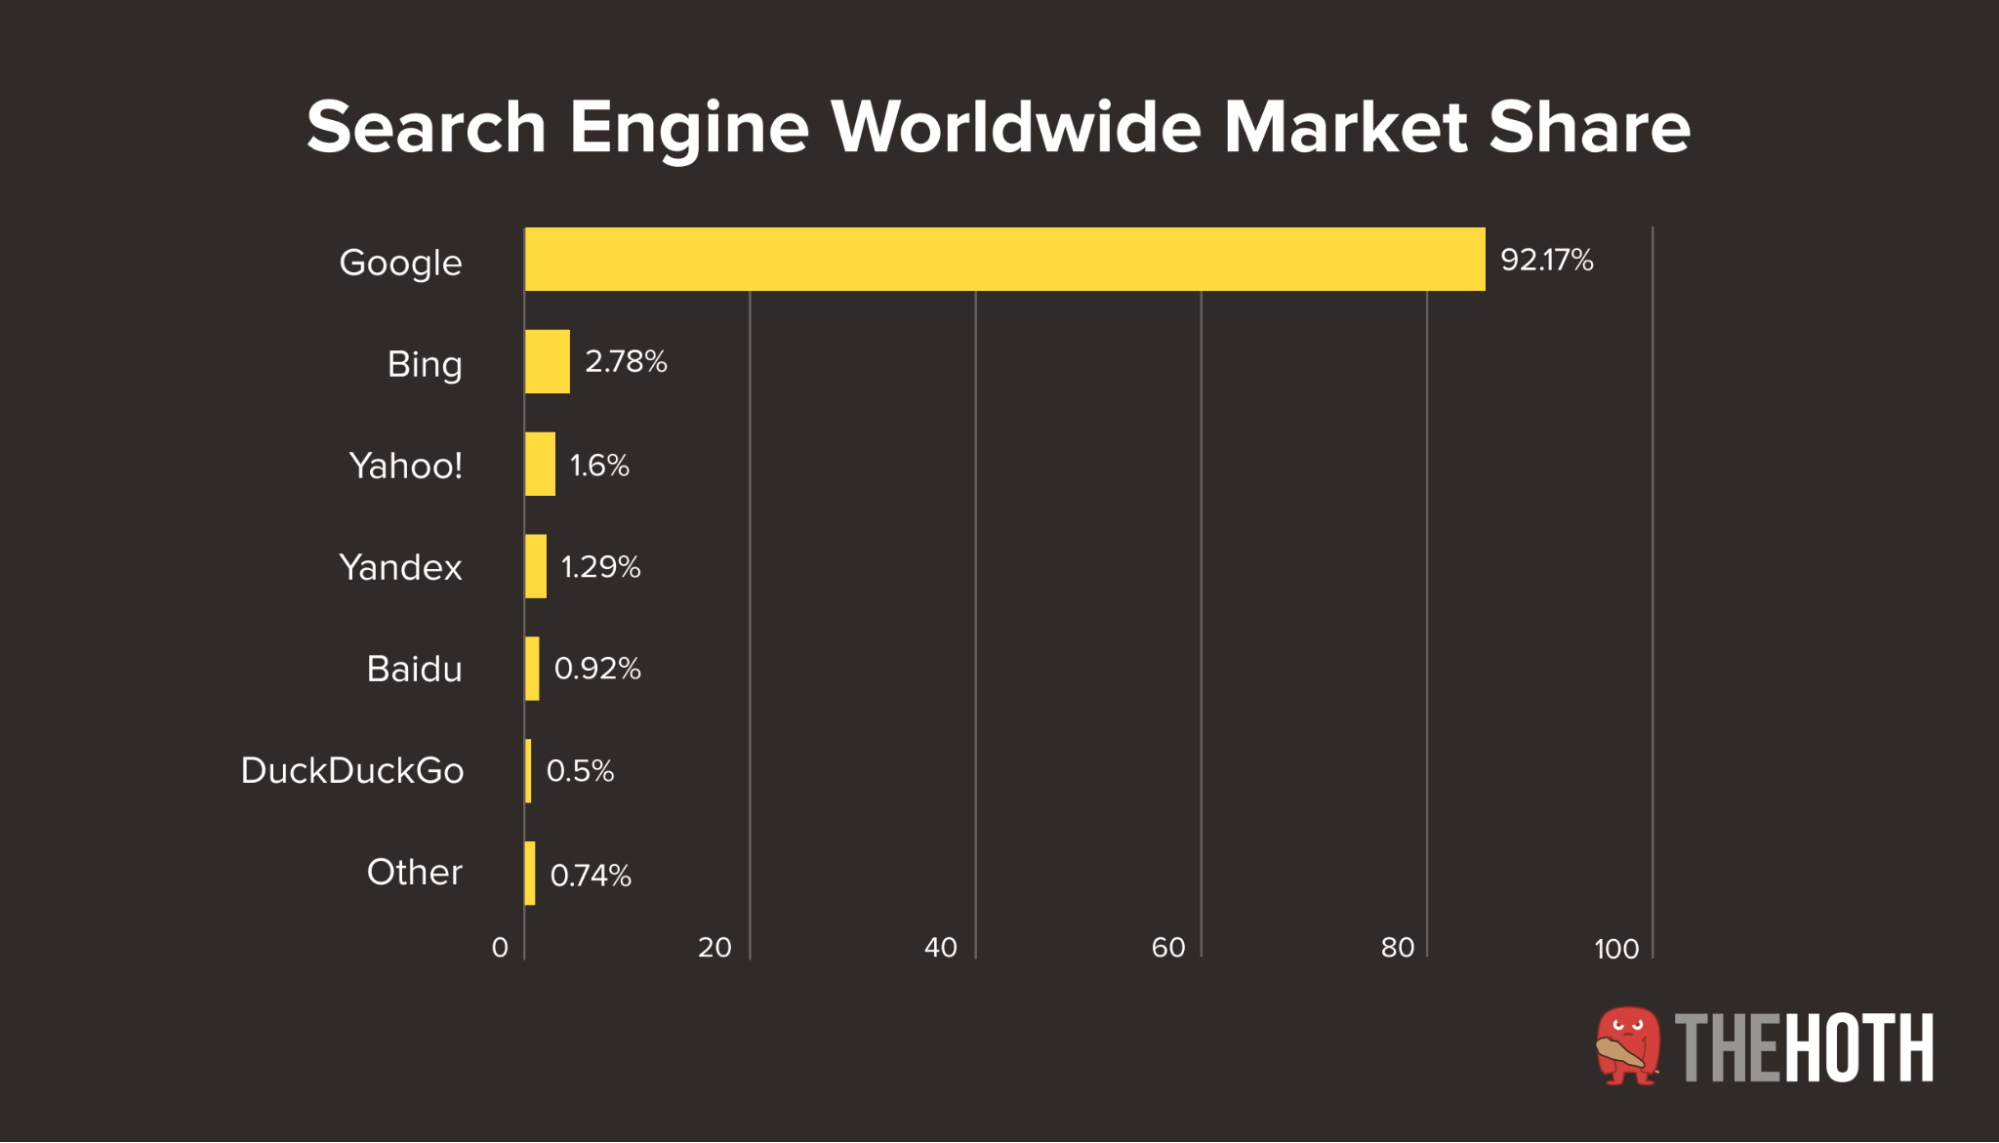 Graph of worldwide search engine market share